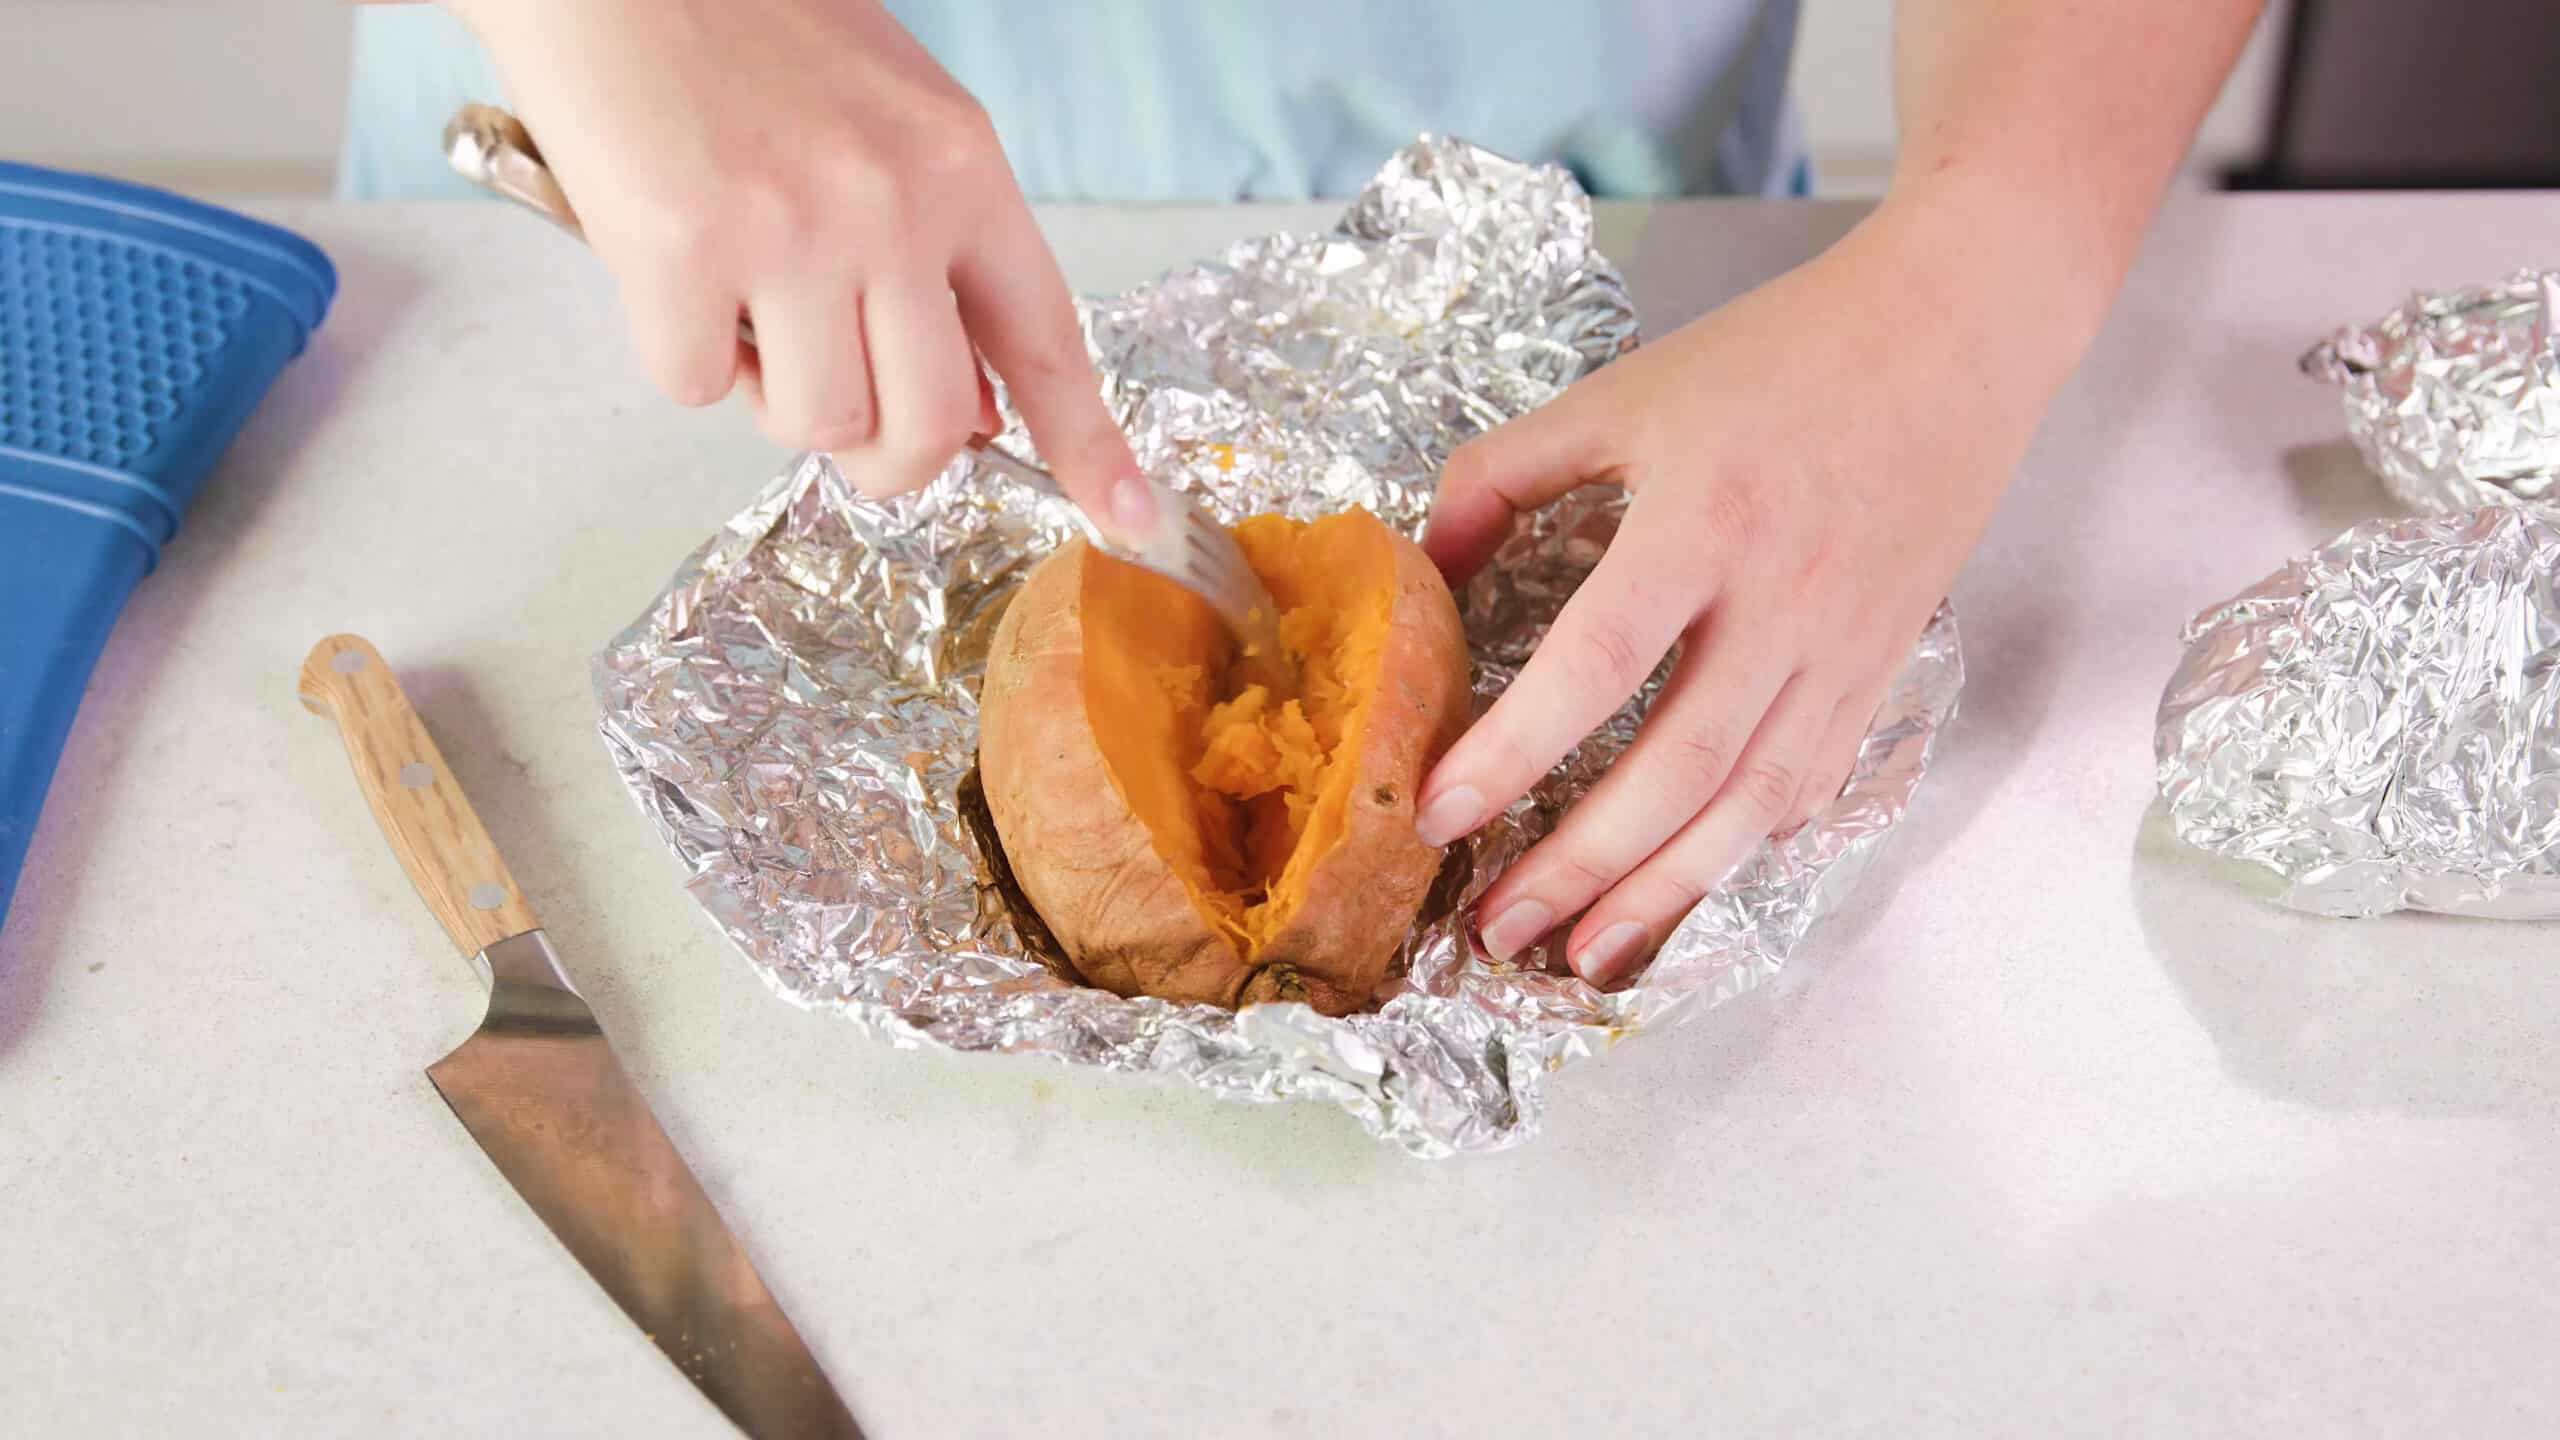 Angled view of the sliced open baked sweet potato on the open aluminum foil and using a silver fork to pull and mash away the interior of the potato.